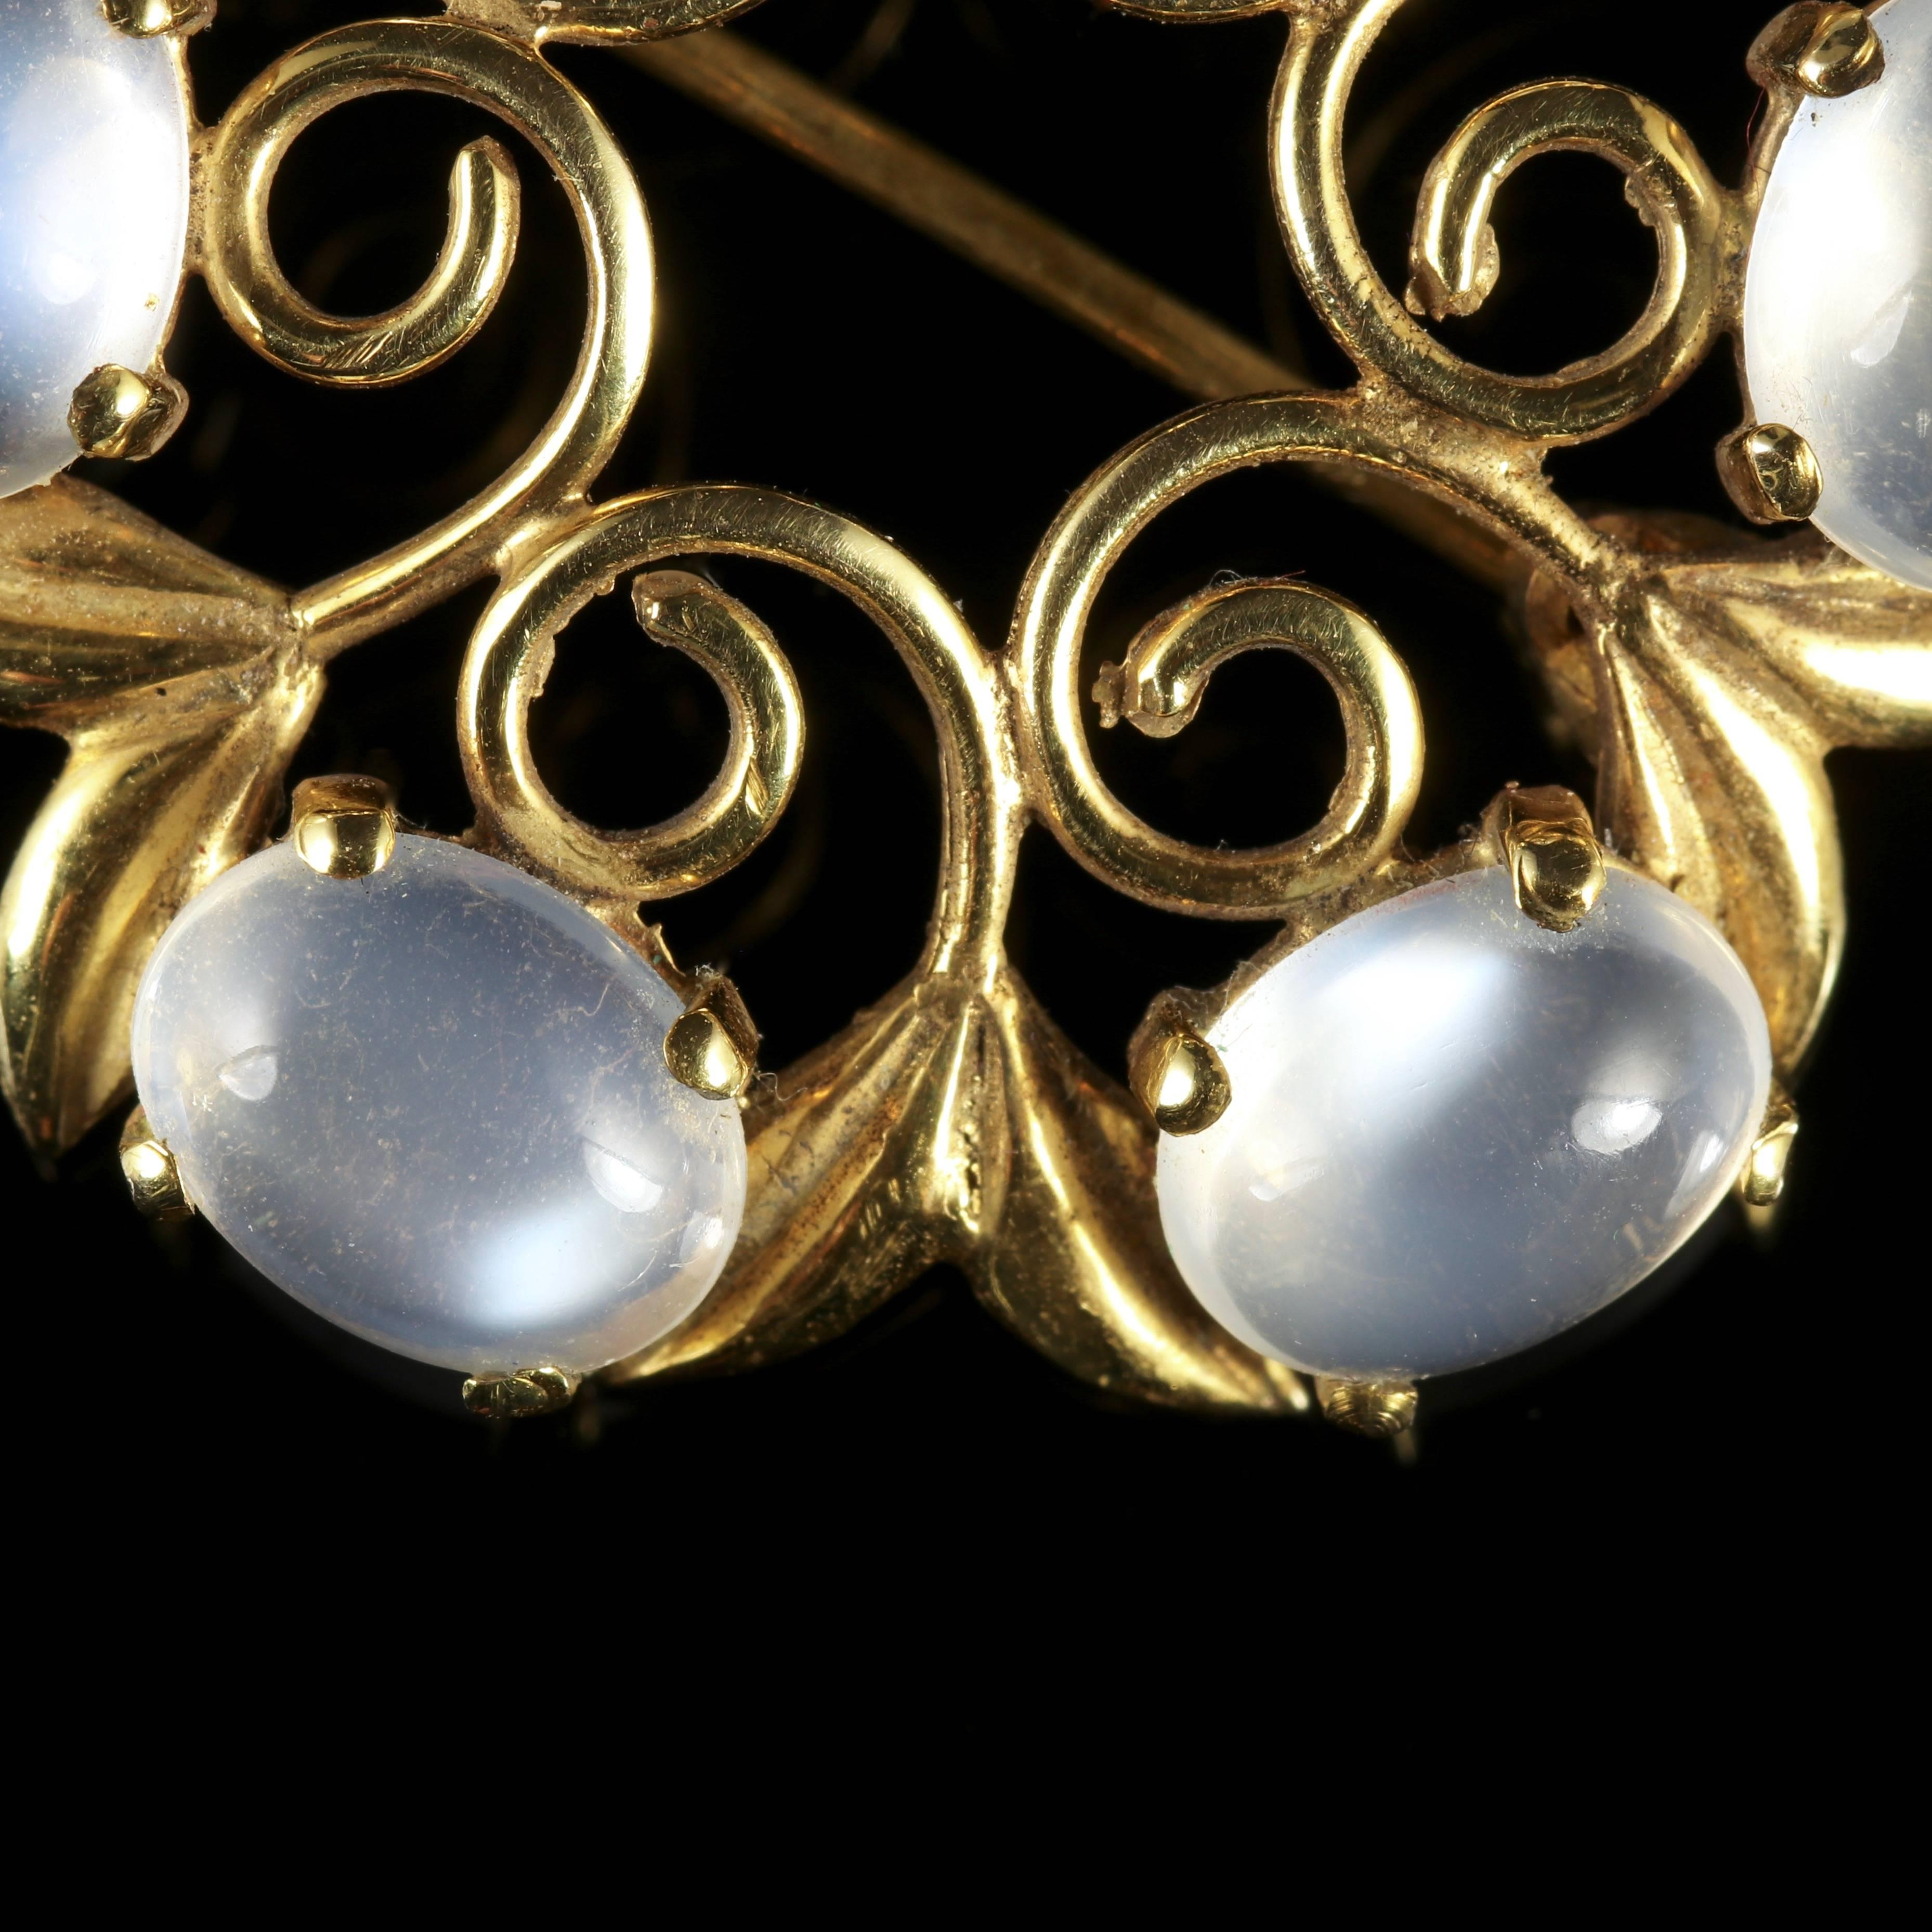 To read more please click continue reading below-

This beautiful Victorian 15ct Yellow Gold brooch is adorned with a halo of Moonstones.

The brooch is set with 6 beautiful Moonstones which are 1ct in size and have a ghostly hue with flashes of